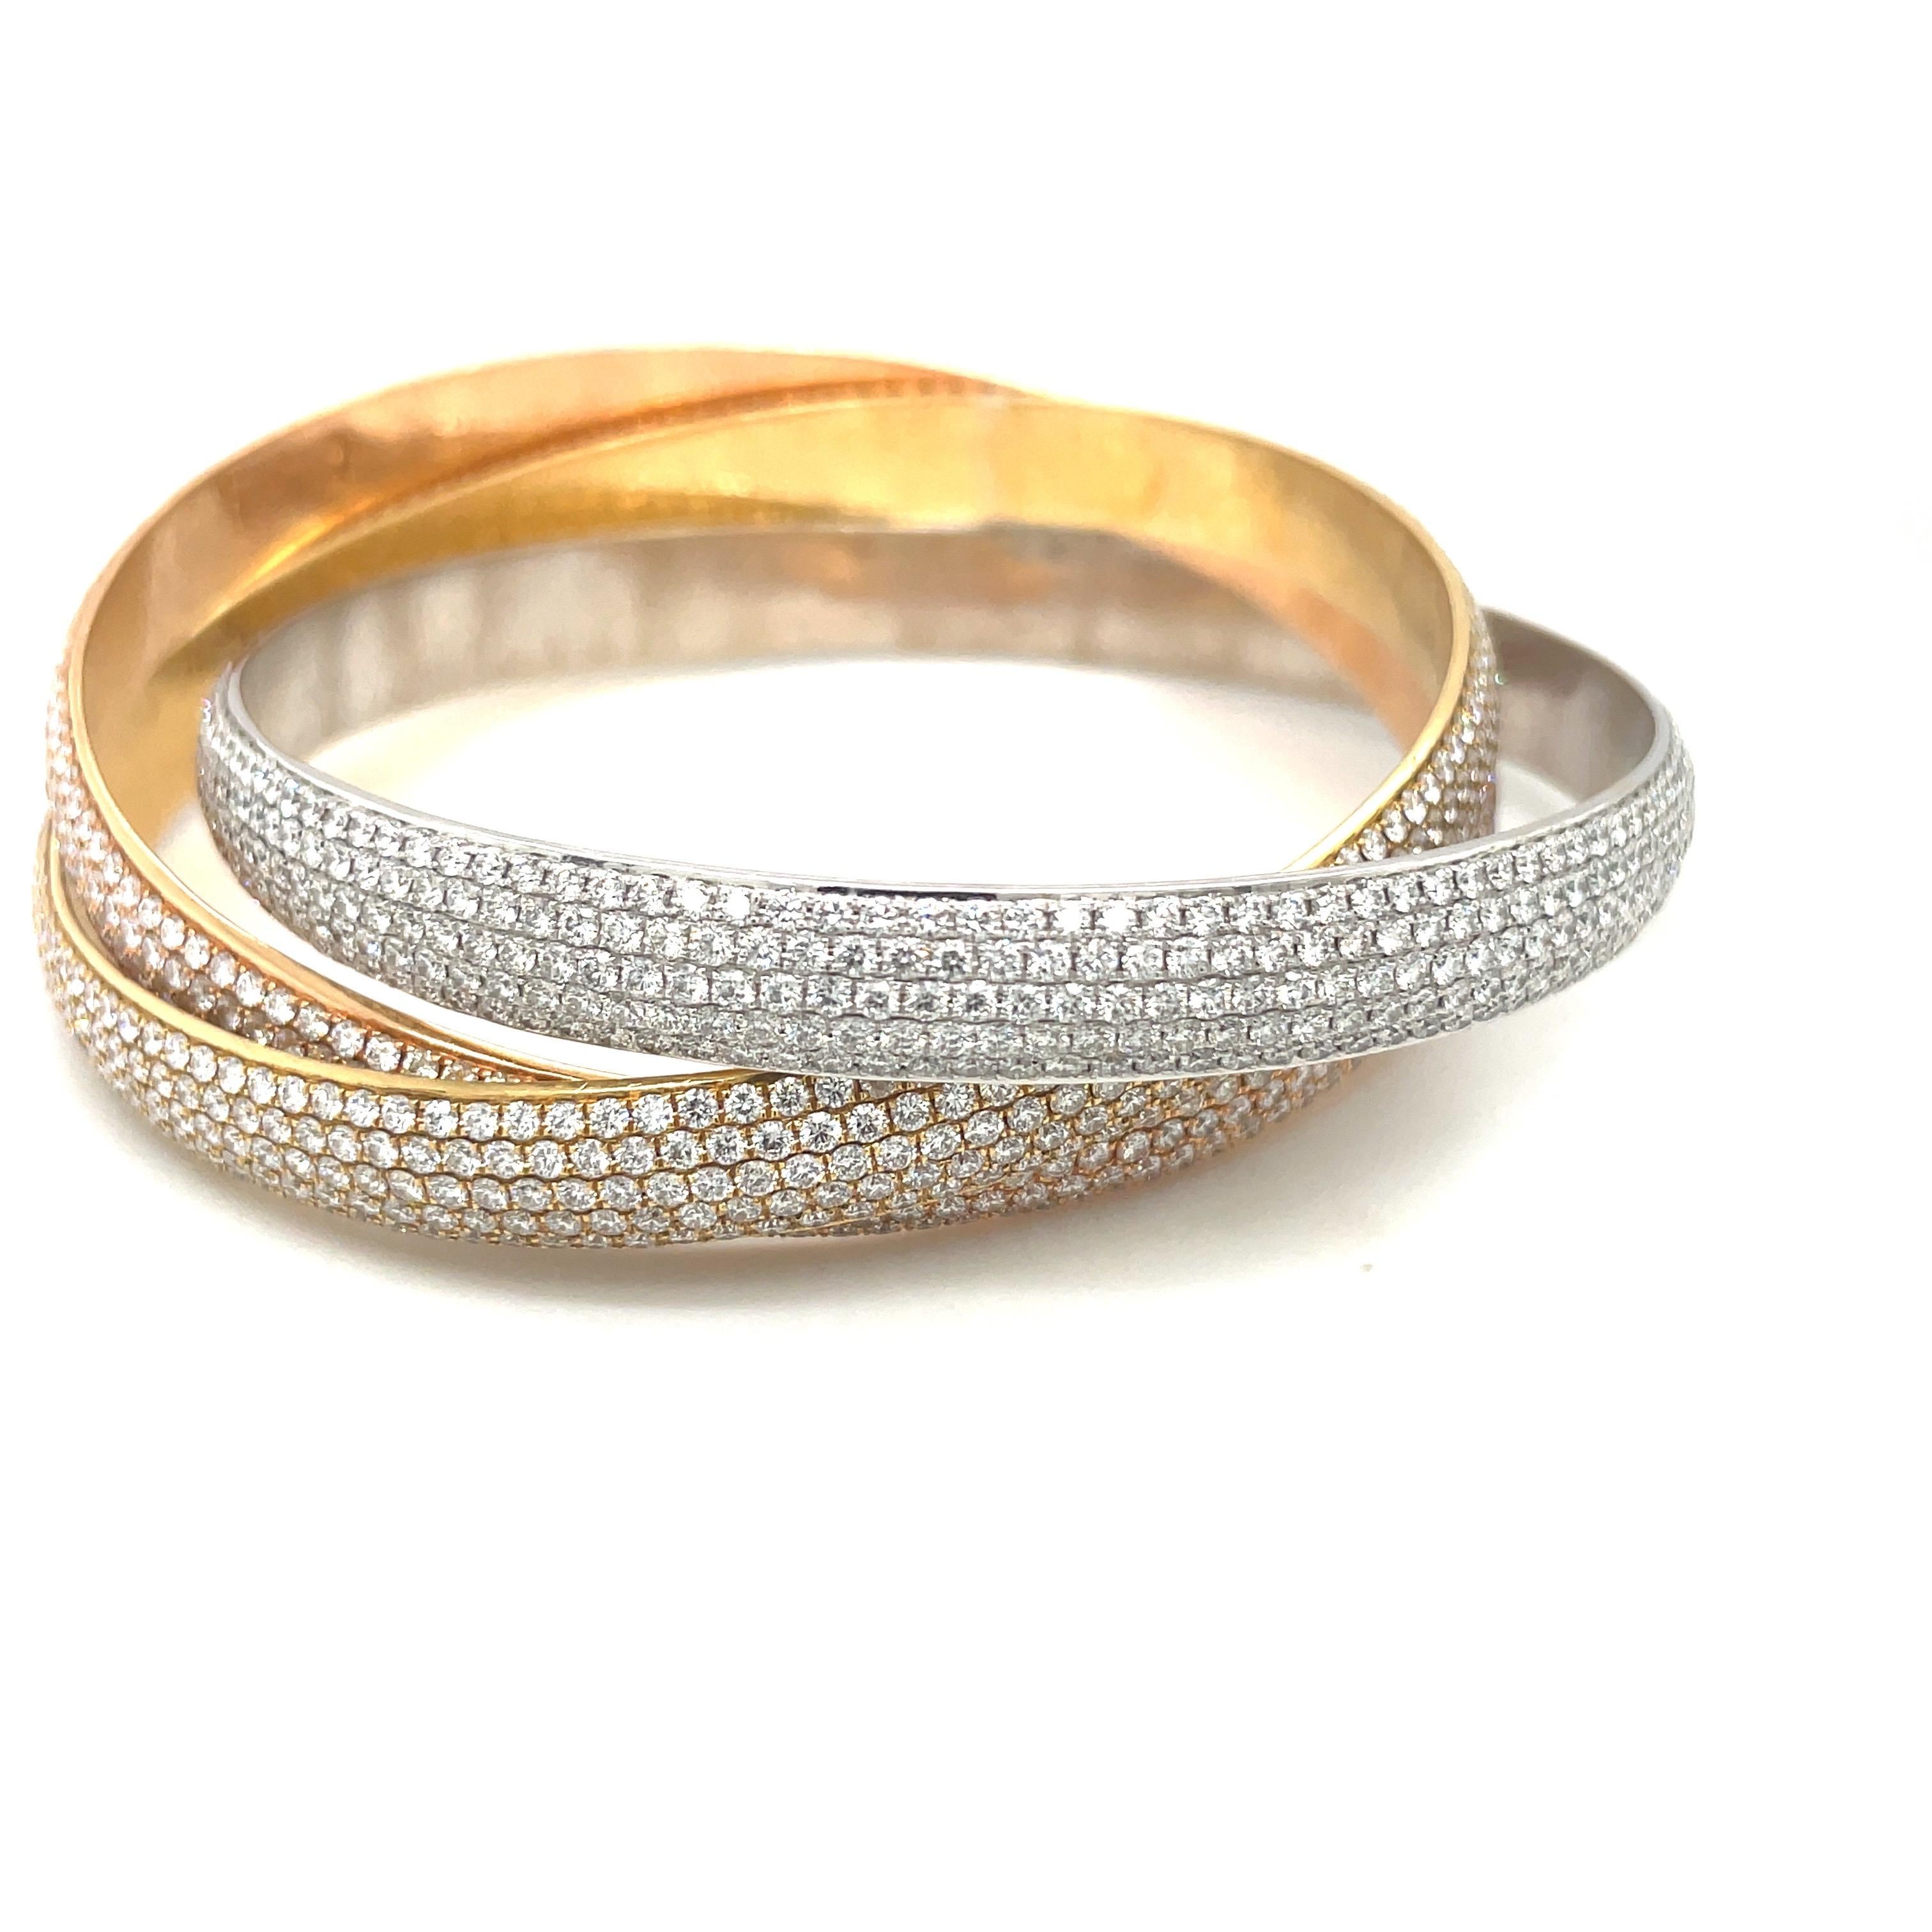 Designed in 18 karat yellow, rose and white gold, this rolling bangle bracelet remains classic. The bangle bracelet is set with 28.00 carats of round brilliant diamonds. Each bracelet has 5 rows of diamonds.
The inside measurement is 2.5 